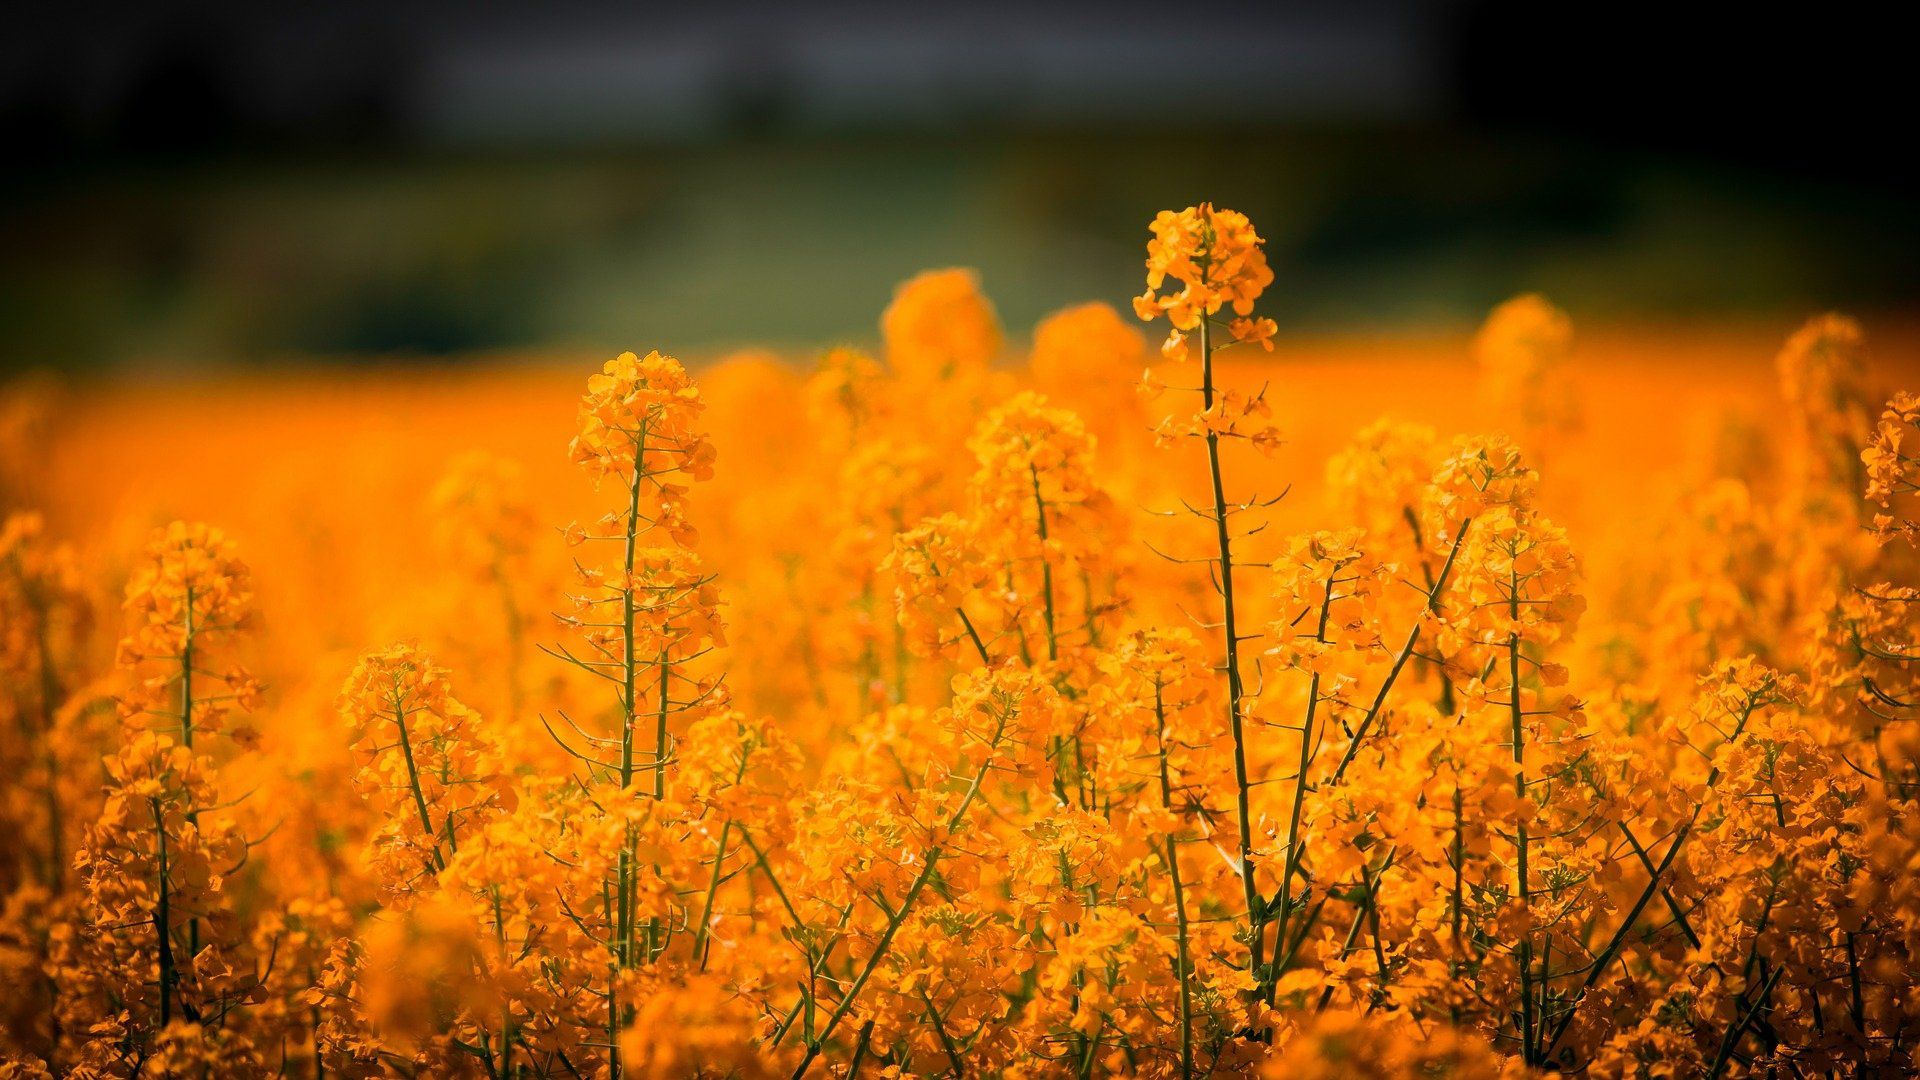 A field of yellow flowers with some trees in the background - Orange